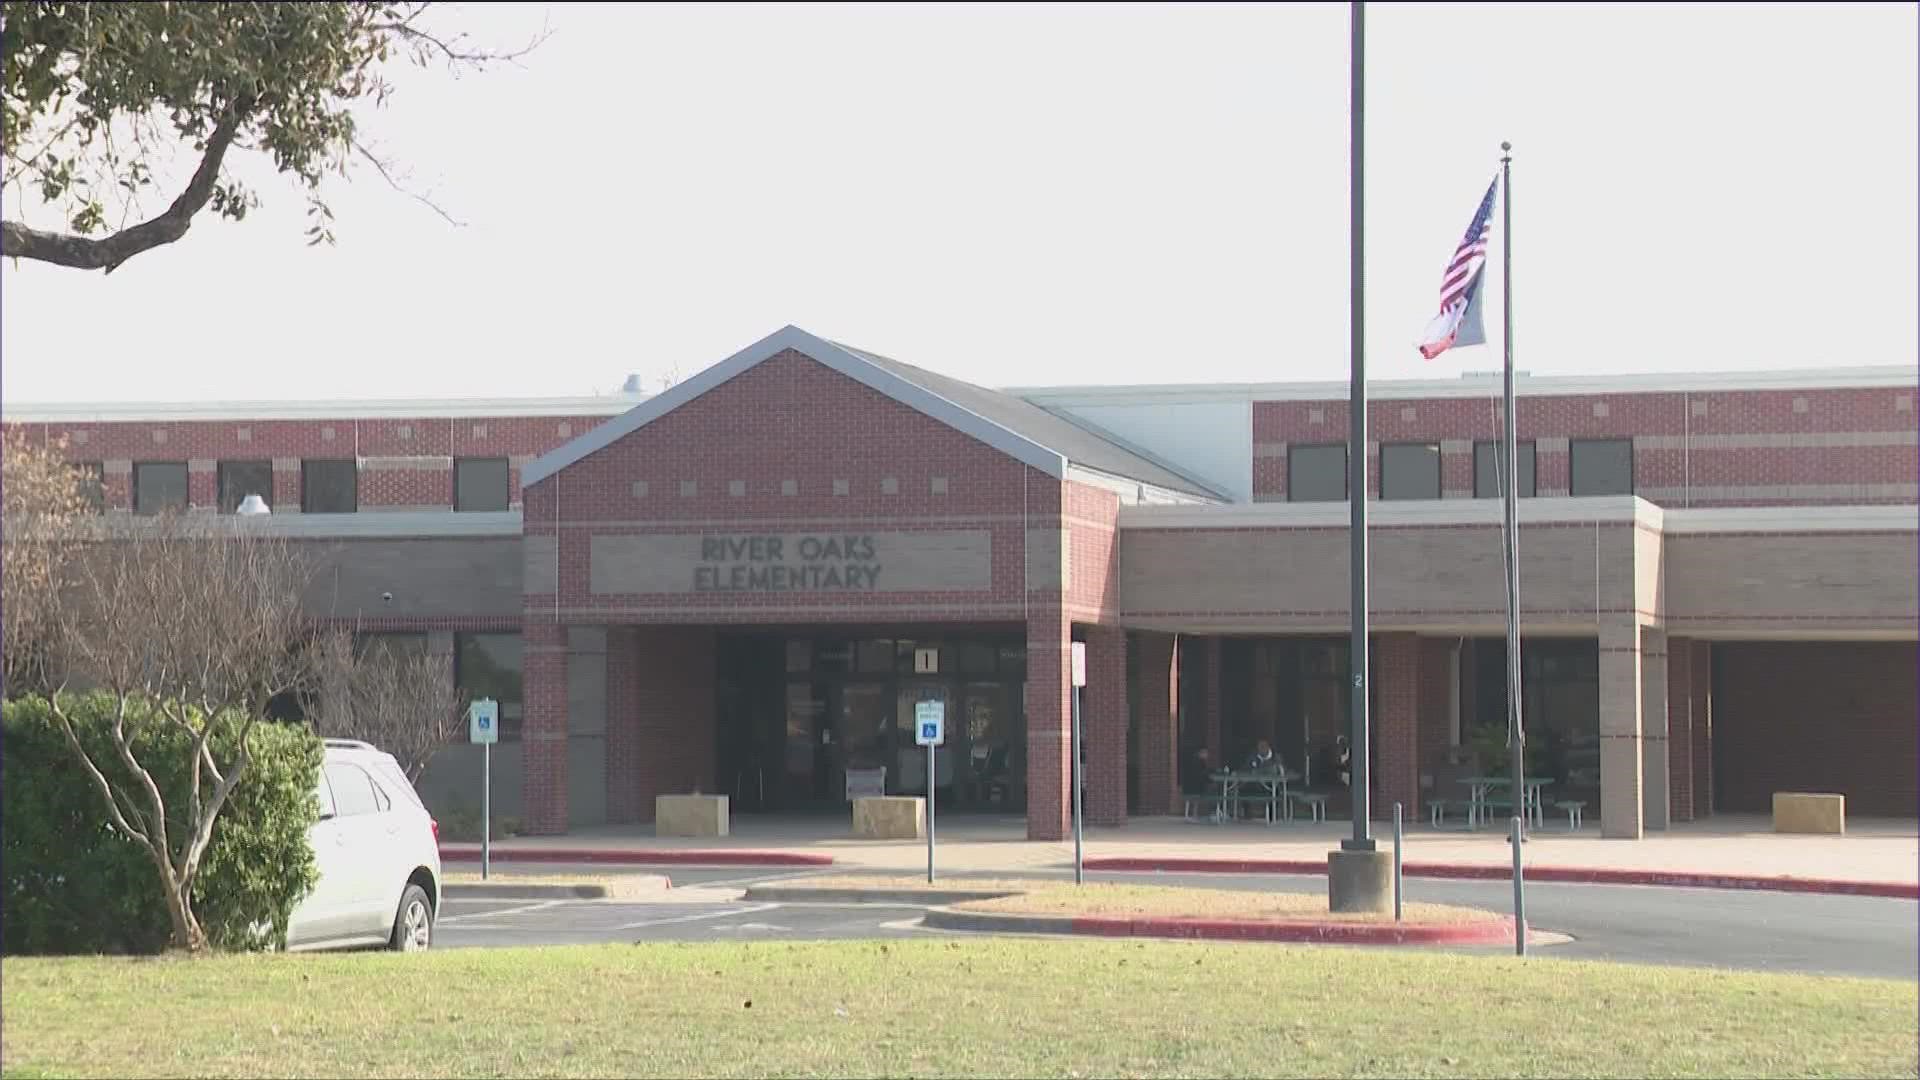 Last month, Pflugerville ISD leaders told parents it is considering adjusting the district's attendance boundaries, which would put some schools at risk of  closing.